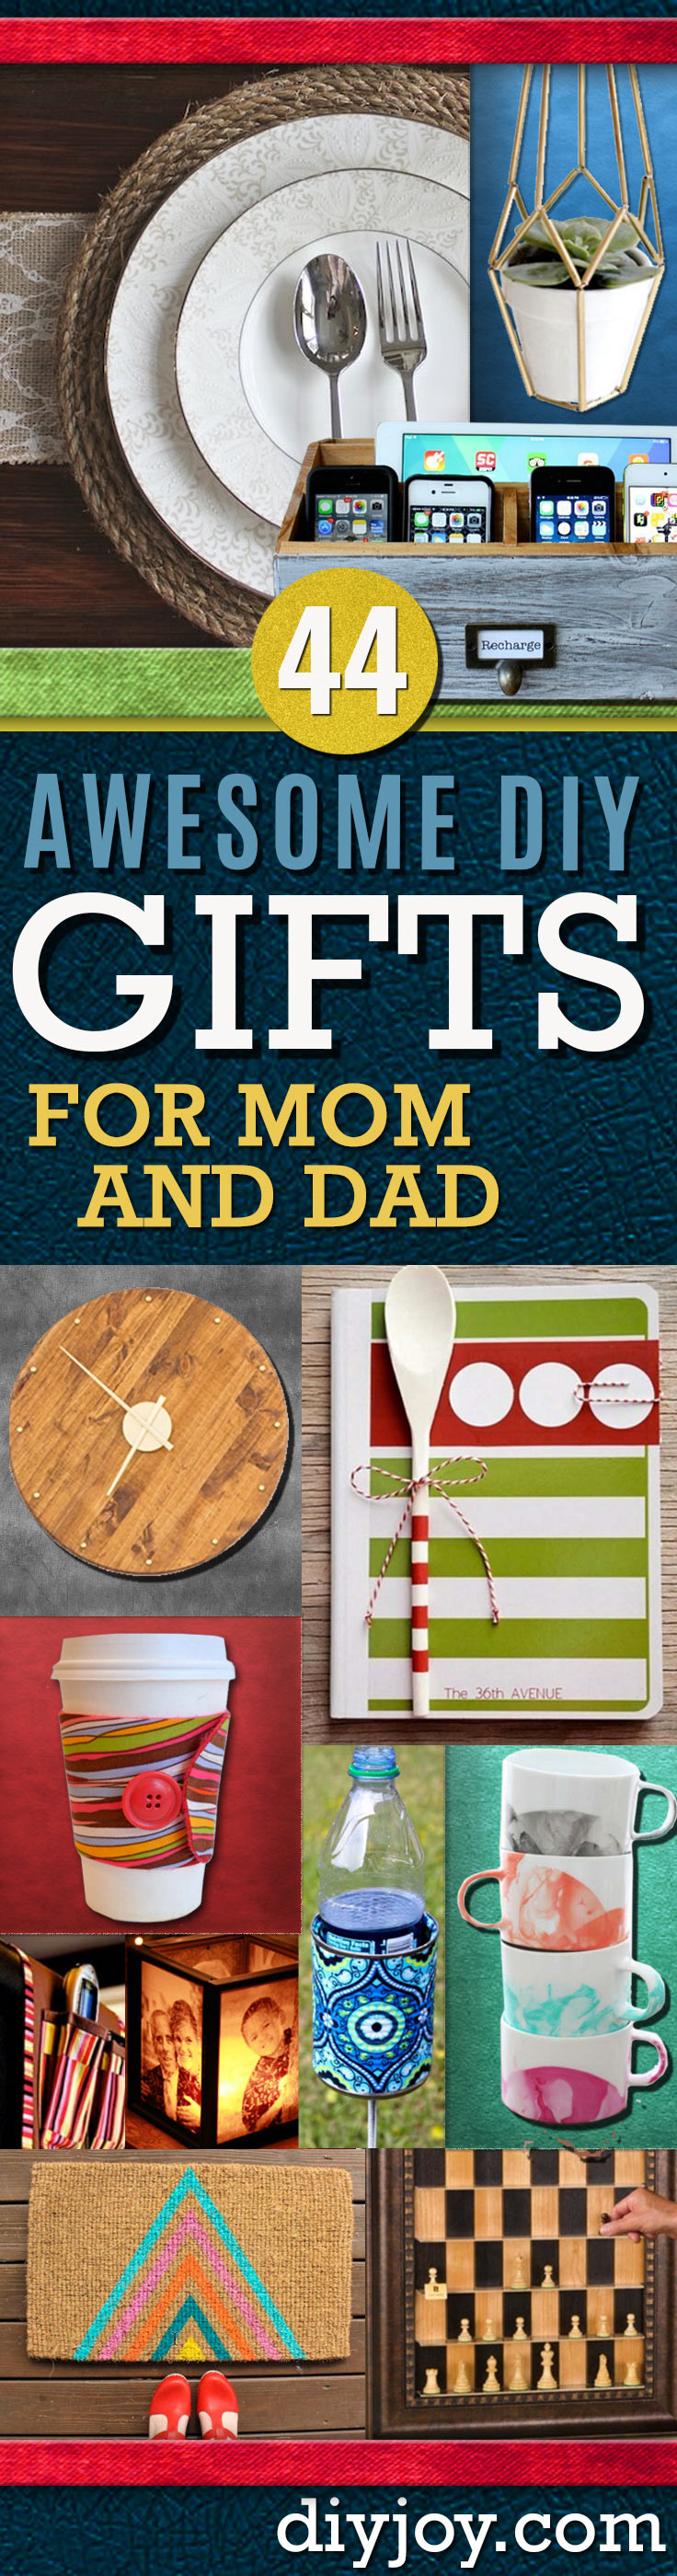 DIY Christmas Gifts For Mom From Daughter
 Awesome DIY Gift Ideas Mom and Dad Will Love